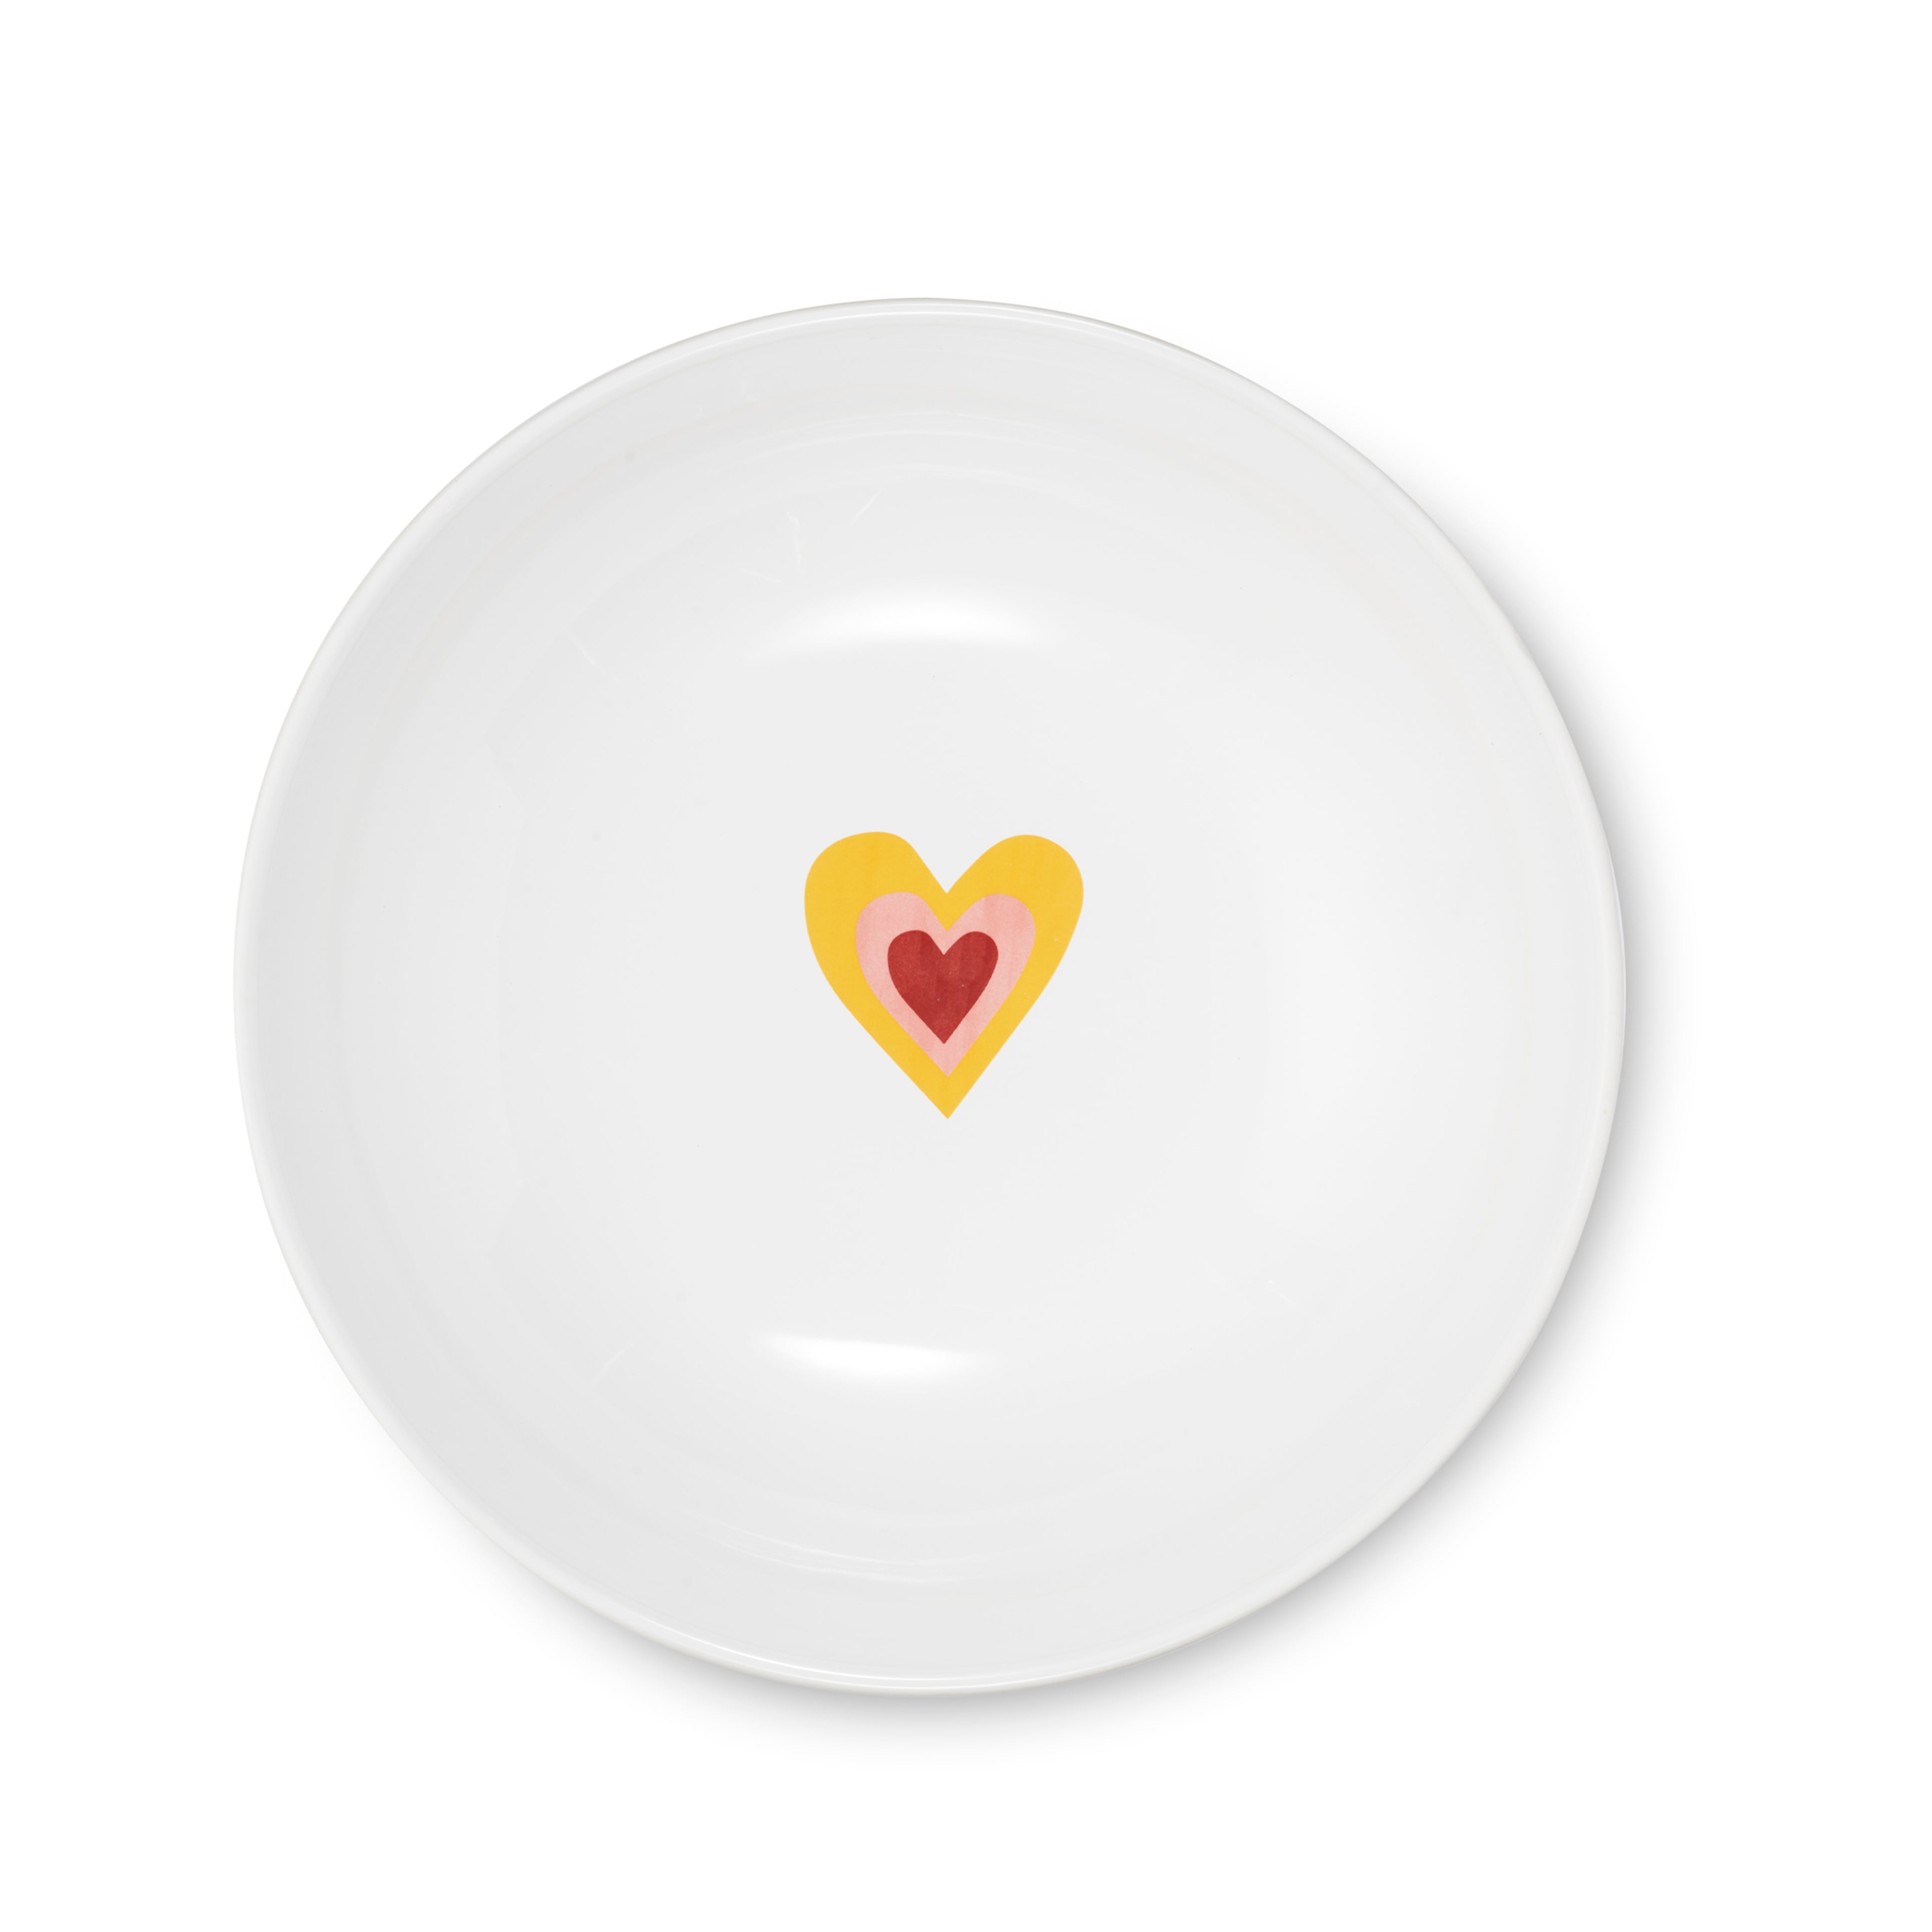 S&B White Serving Bowl with A Heart in Lemon Yellow